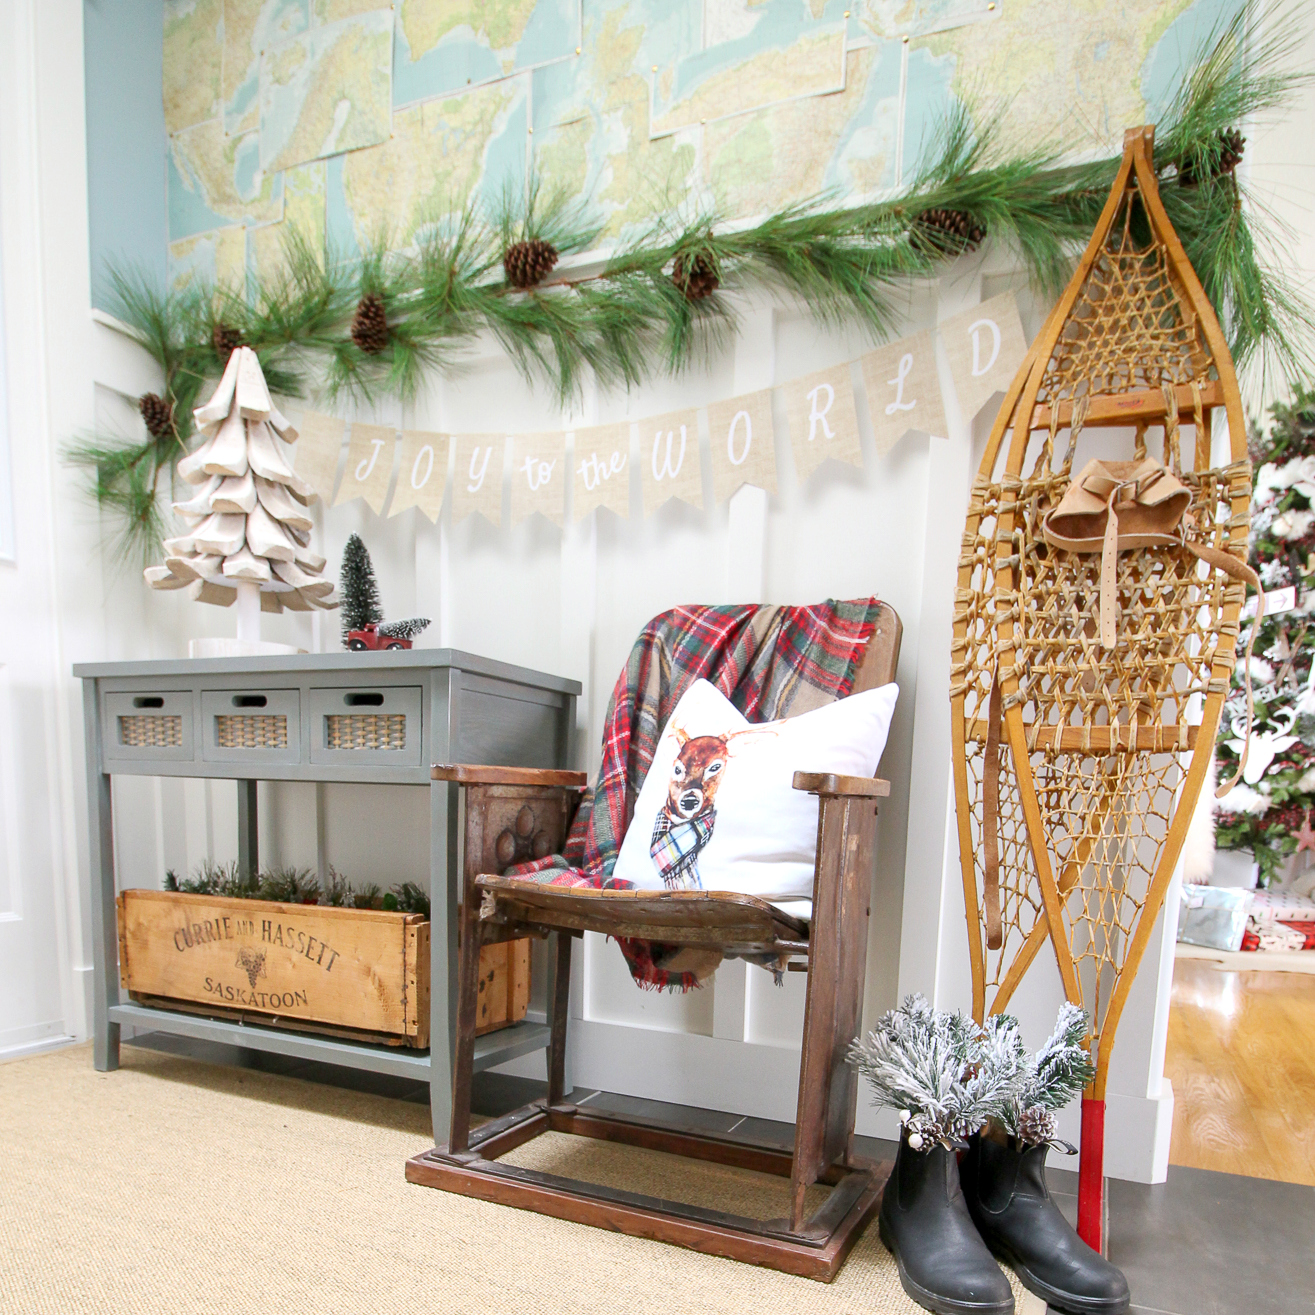 Our Christmas Entry Hall {with free printable Joy to the World Banner}